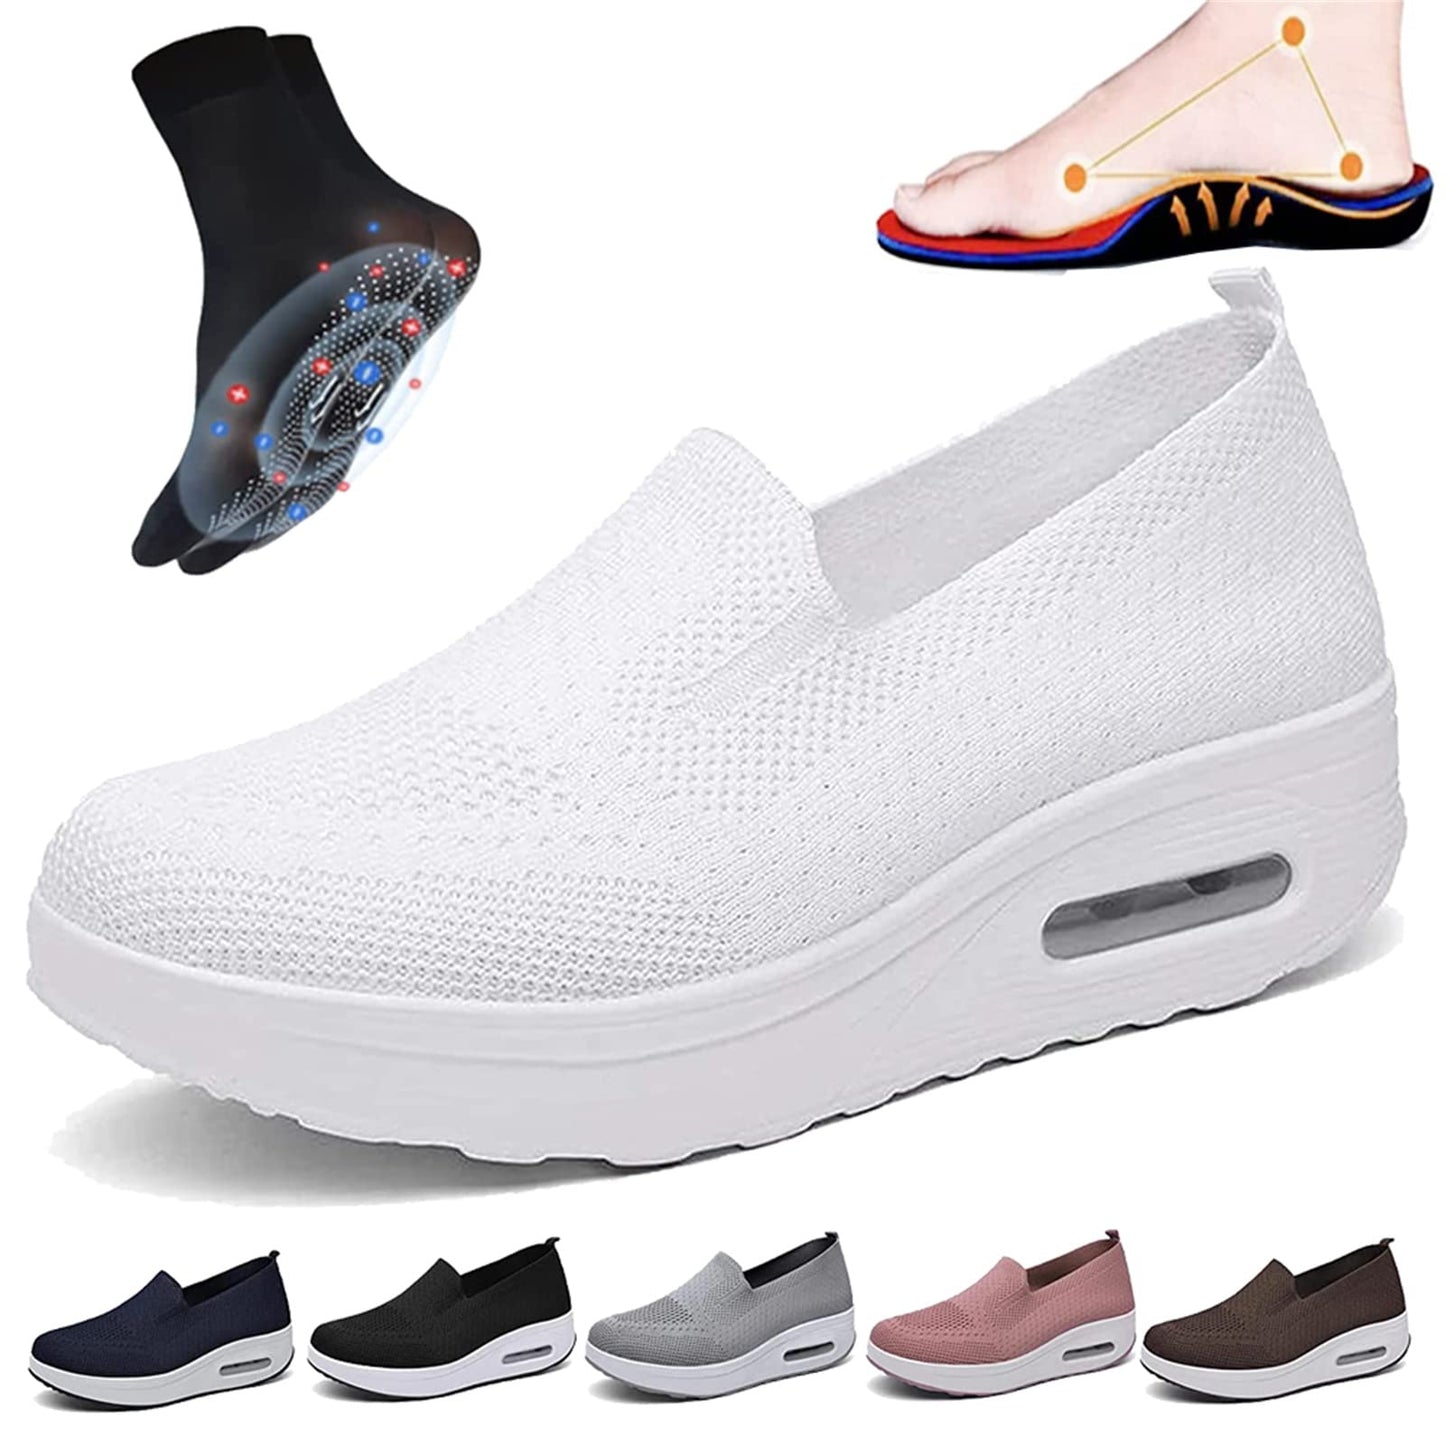 🔥Last Day 60% OFF - Slip-on light air cushion orthopedic Sneakers - fits